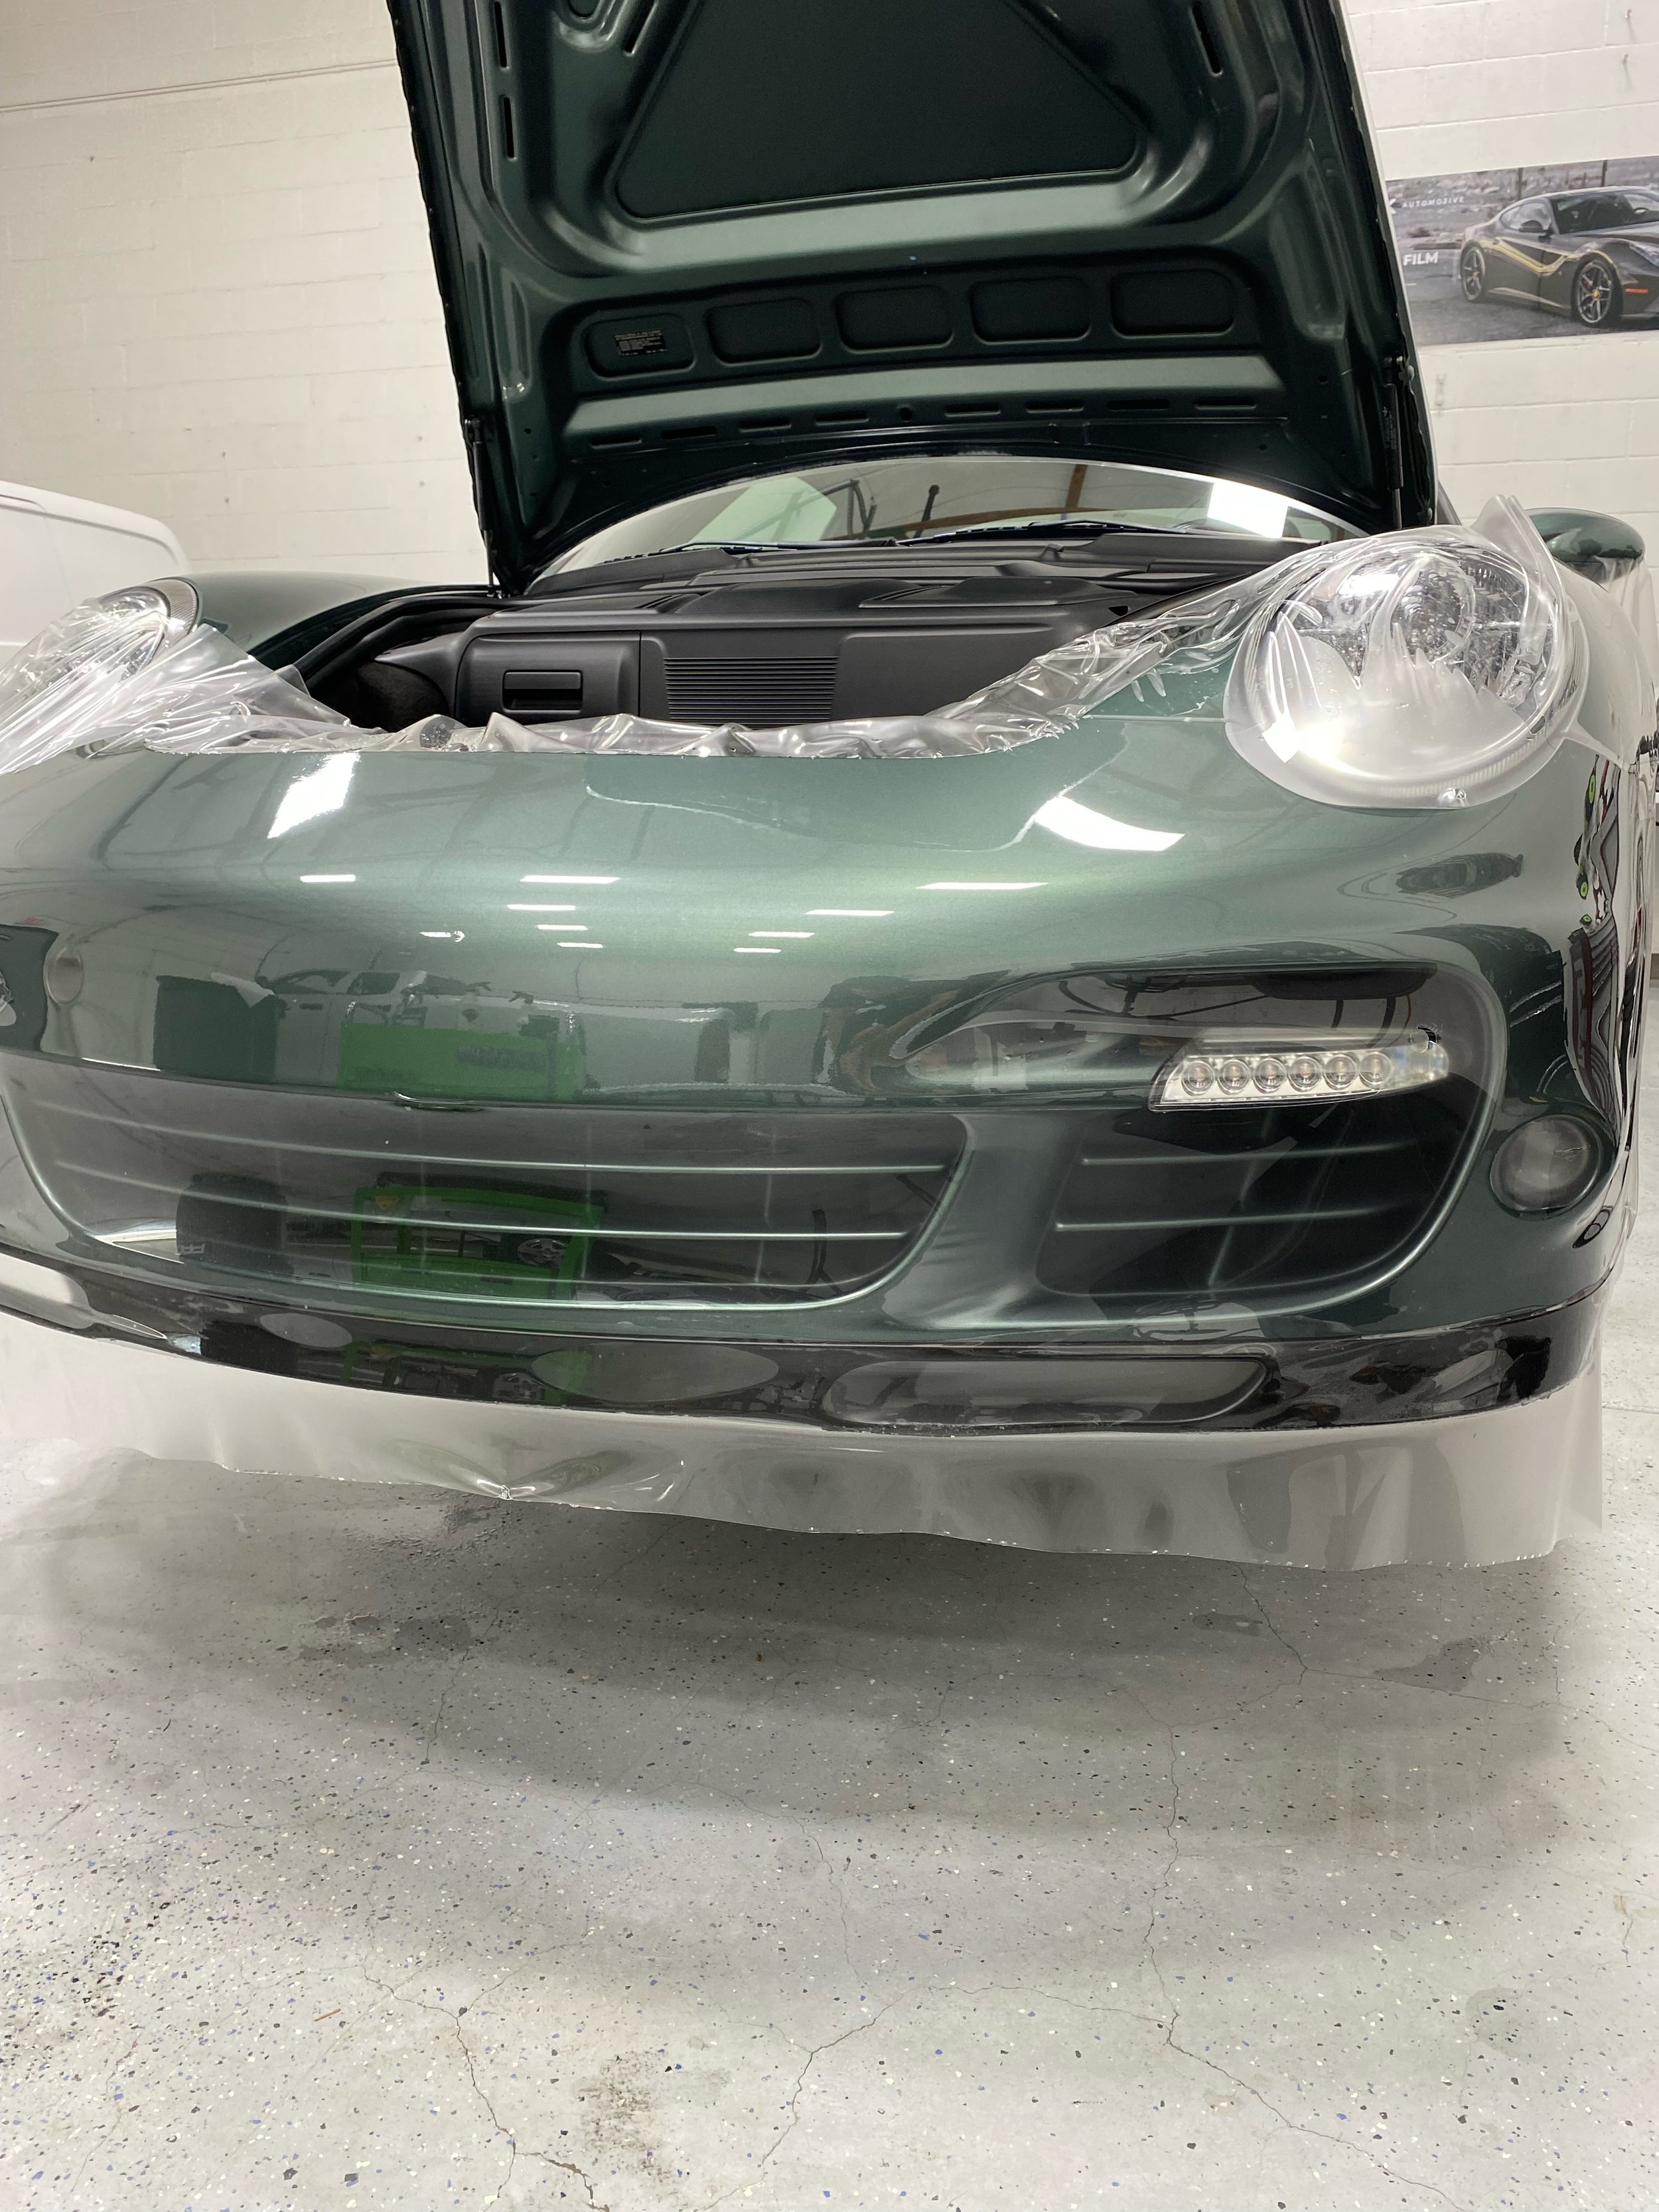 Should Paint Protection Film Be Removed